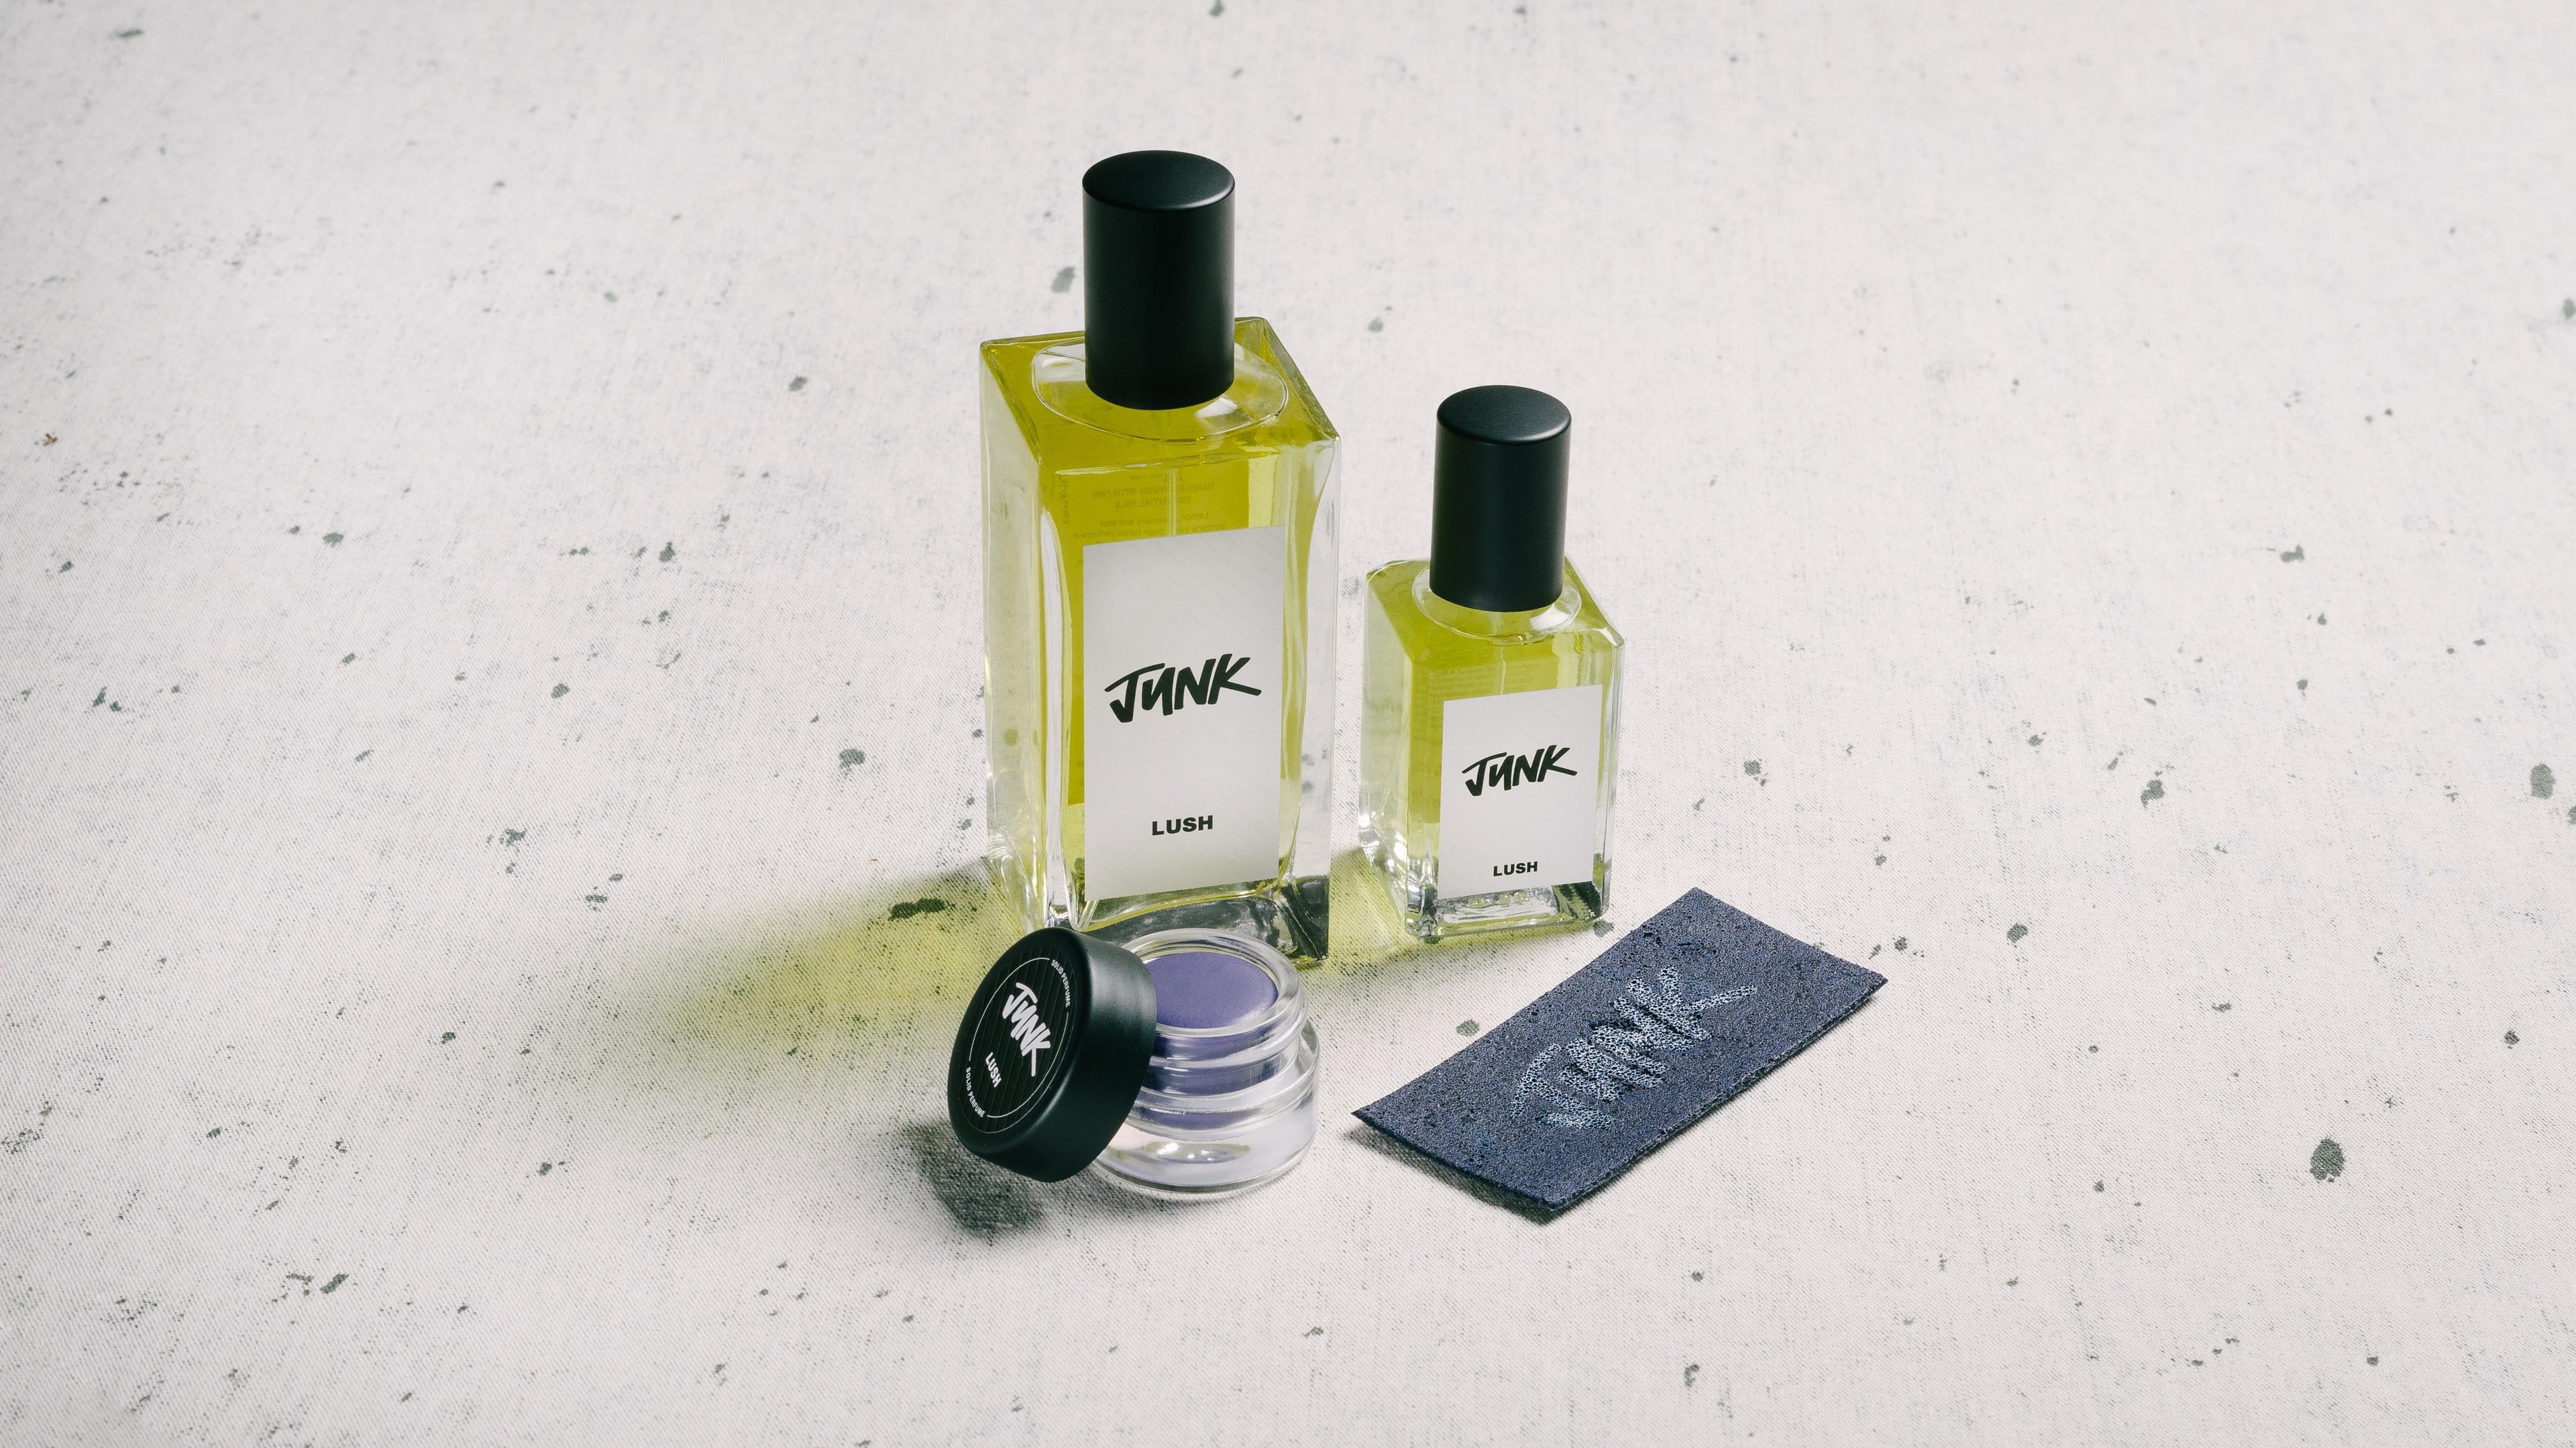 The whole Junk fragrance collection is displayed on a white surface, flecked with grey.